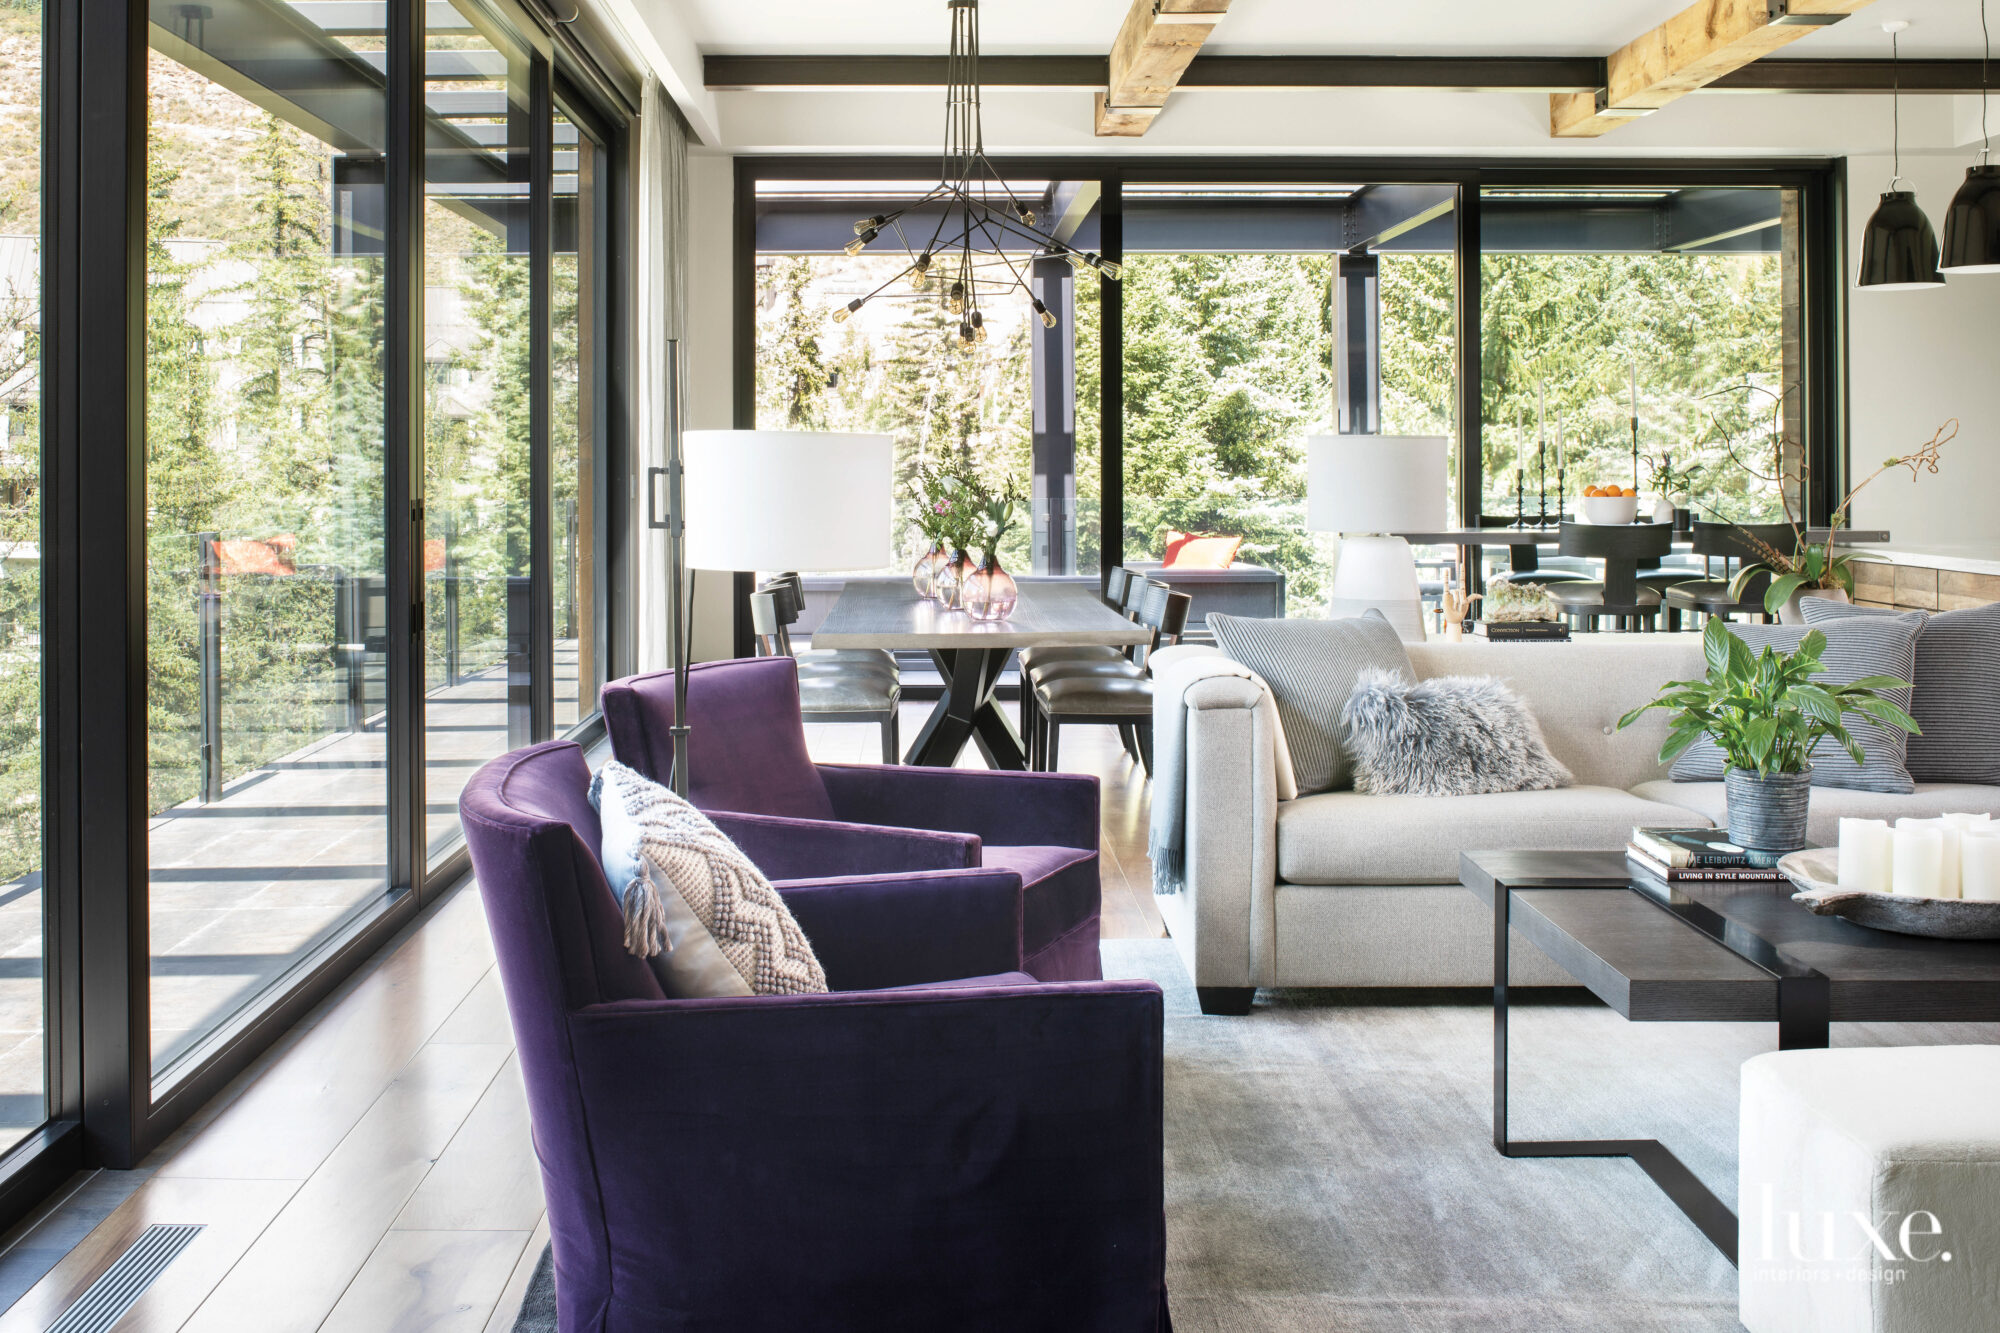 A living room features a pair of purple chairs and a neutral sofa.